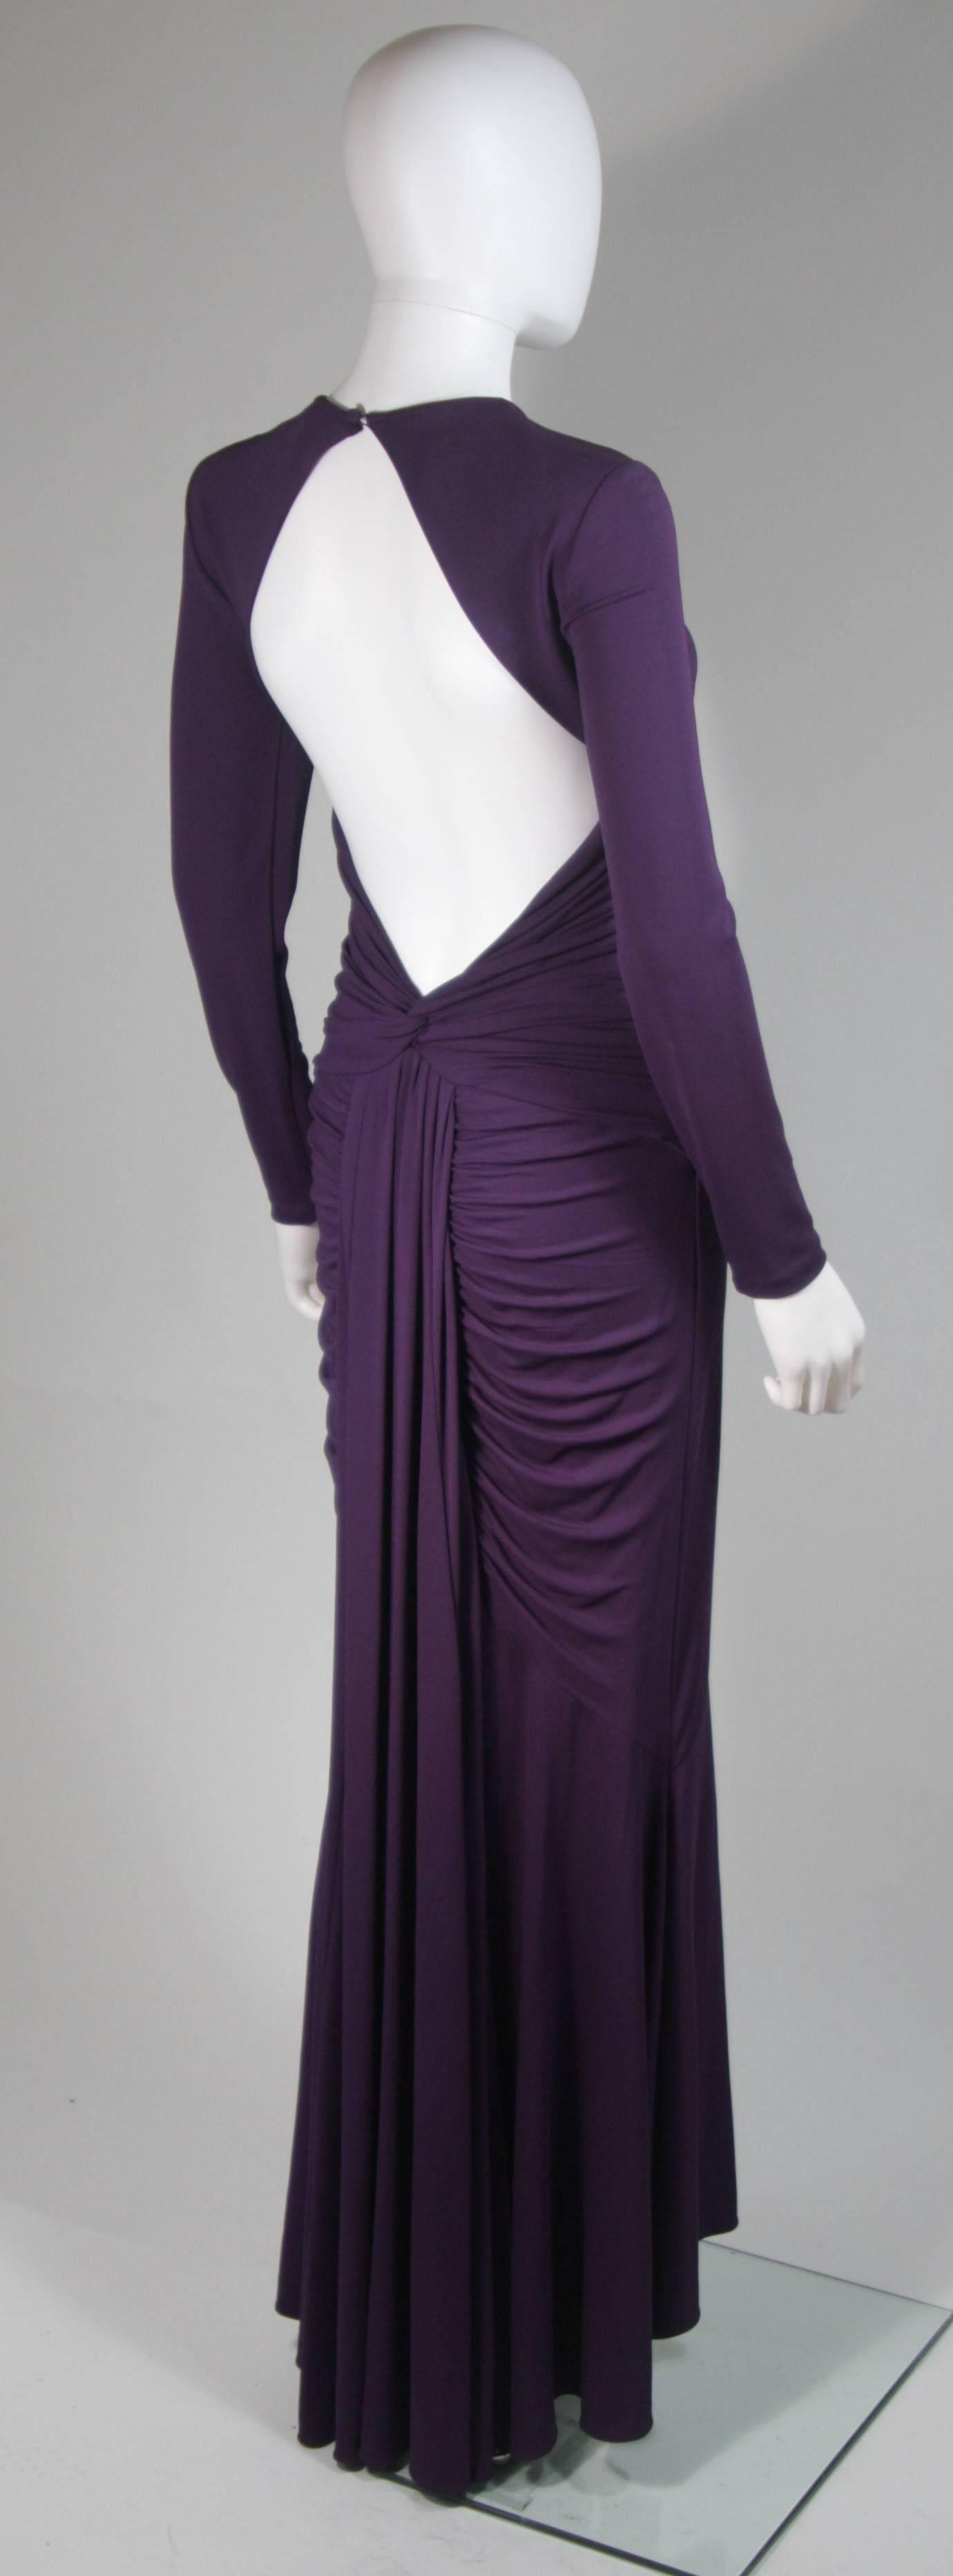 MICHAEL KORS Purple Stretch Jersey Draped Gown with Open Back Size 10 In Excellent Condition For Sale In Los Angeles, CA